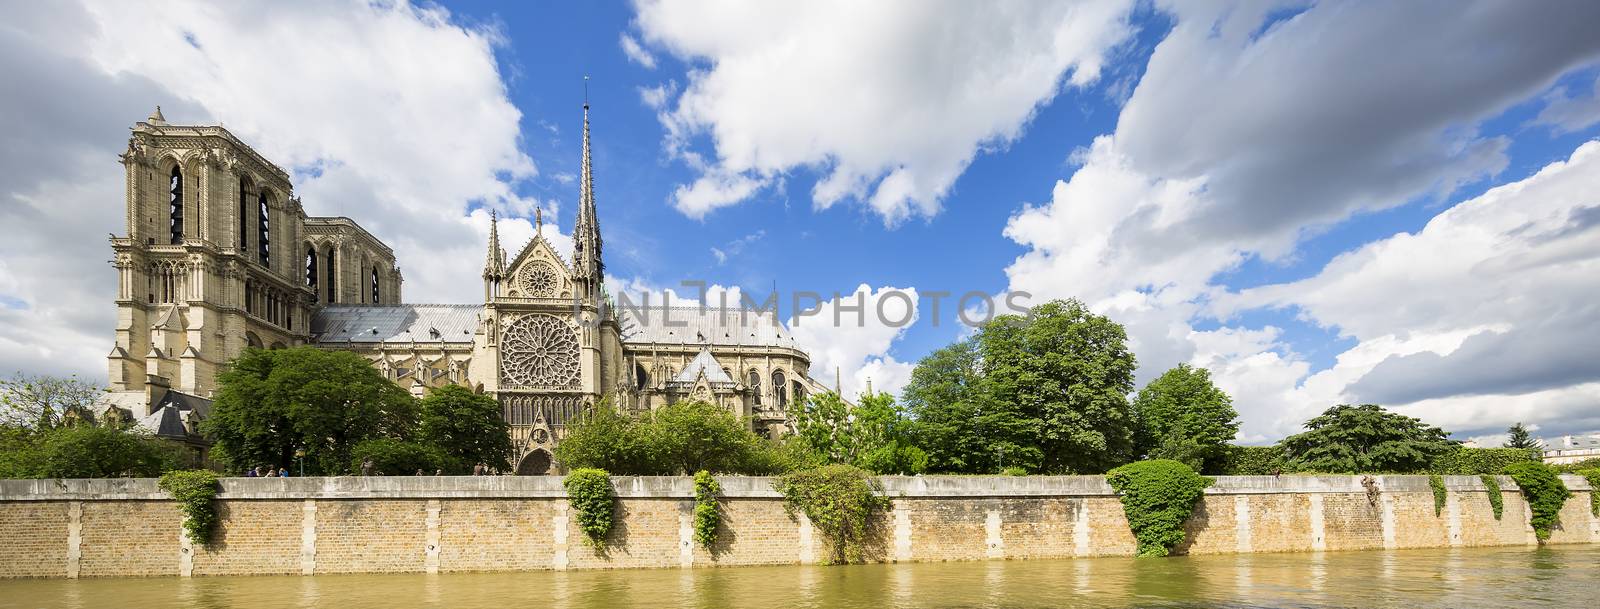 Panoramic view of Notre Dame Cathedral - Paris, France, Europe.